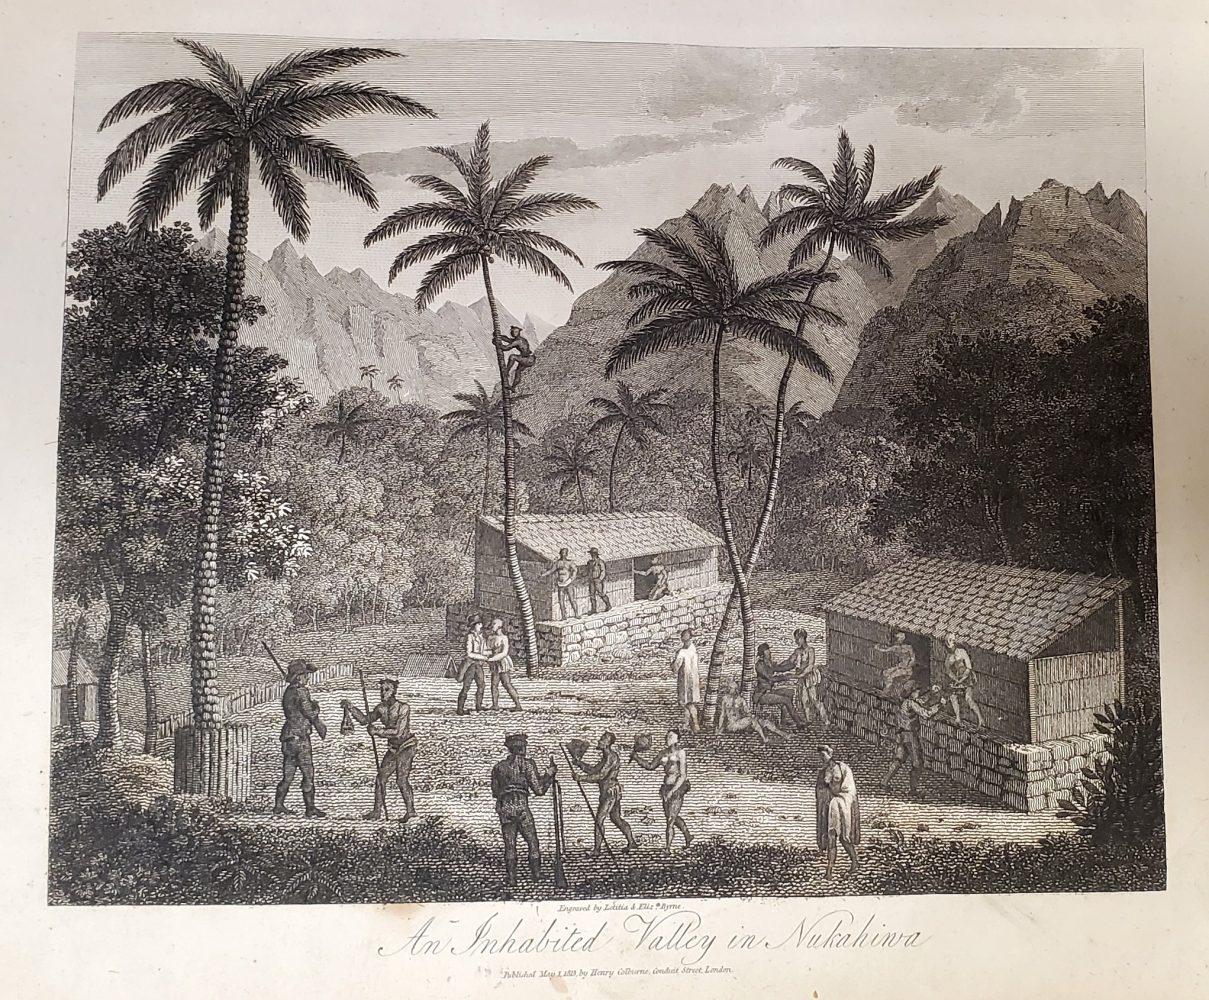 Village scene with two houses, human figures and tall palm trees.